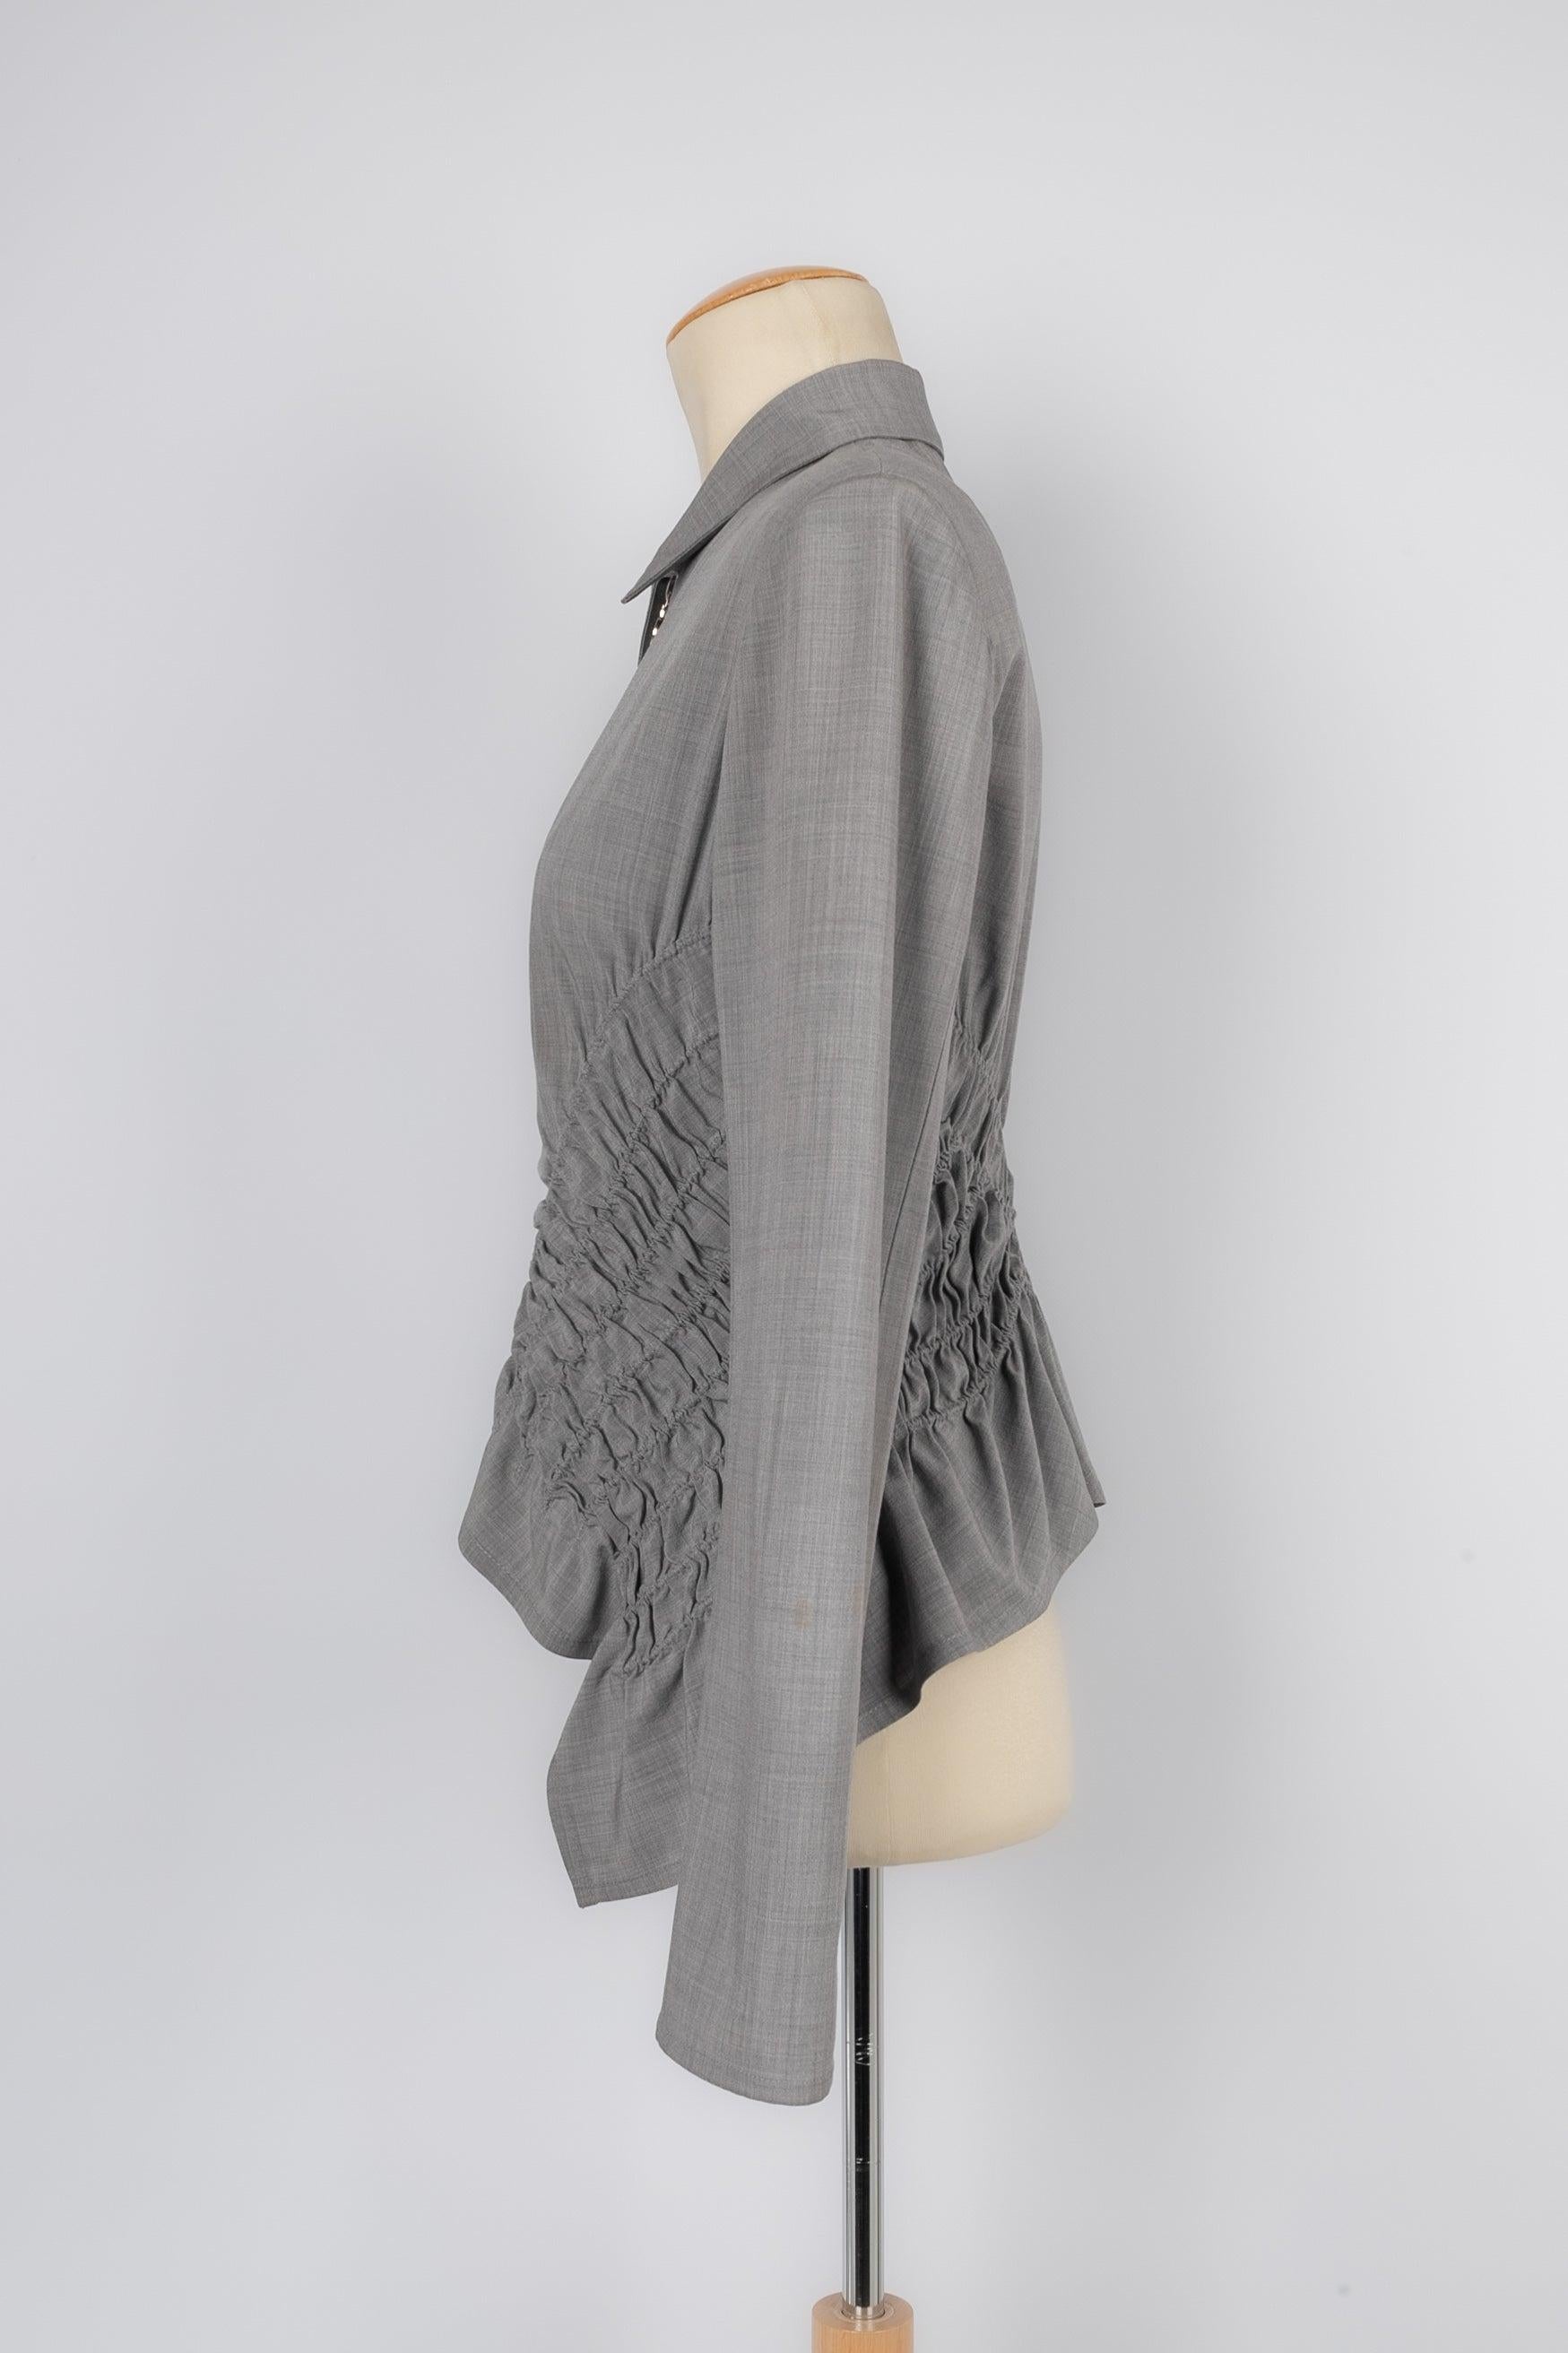 Dior - (Made in France) Grey blended wool short jacket. Size 40FR. 2001 Spring-Summer Ready-to-Wear Collection under the artistic direction of John Galliano.

Additional information:
Condition: Very good condition
Dimensions: Shoulder width: 40 cm -